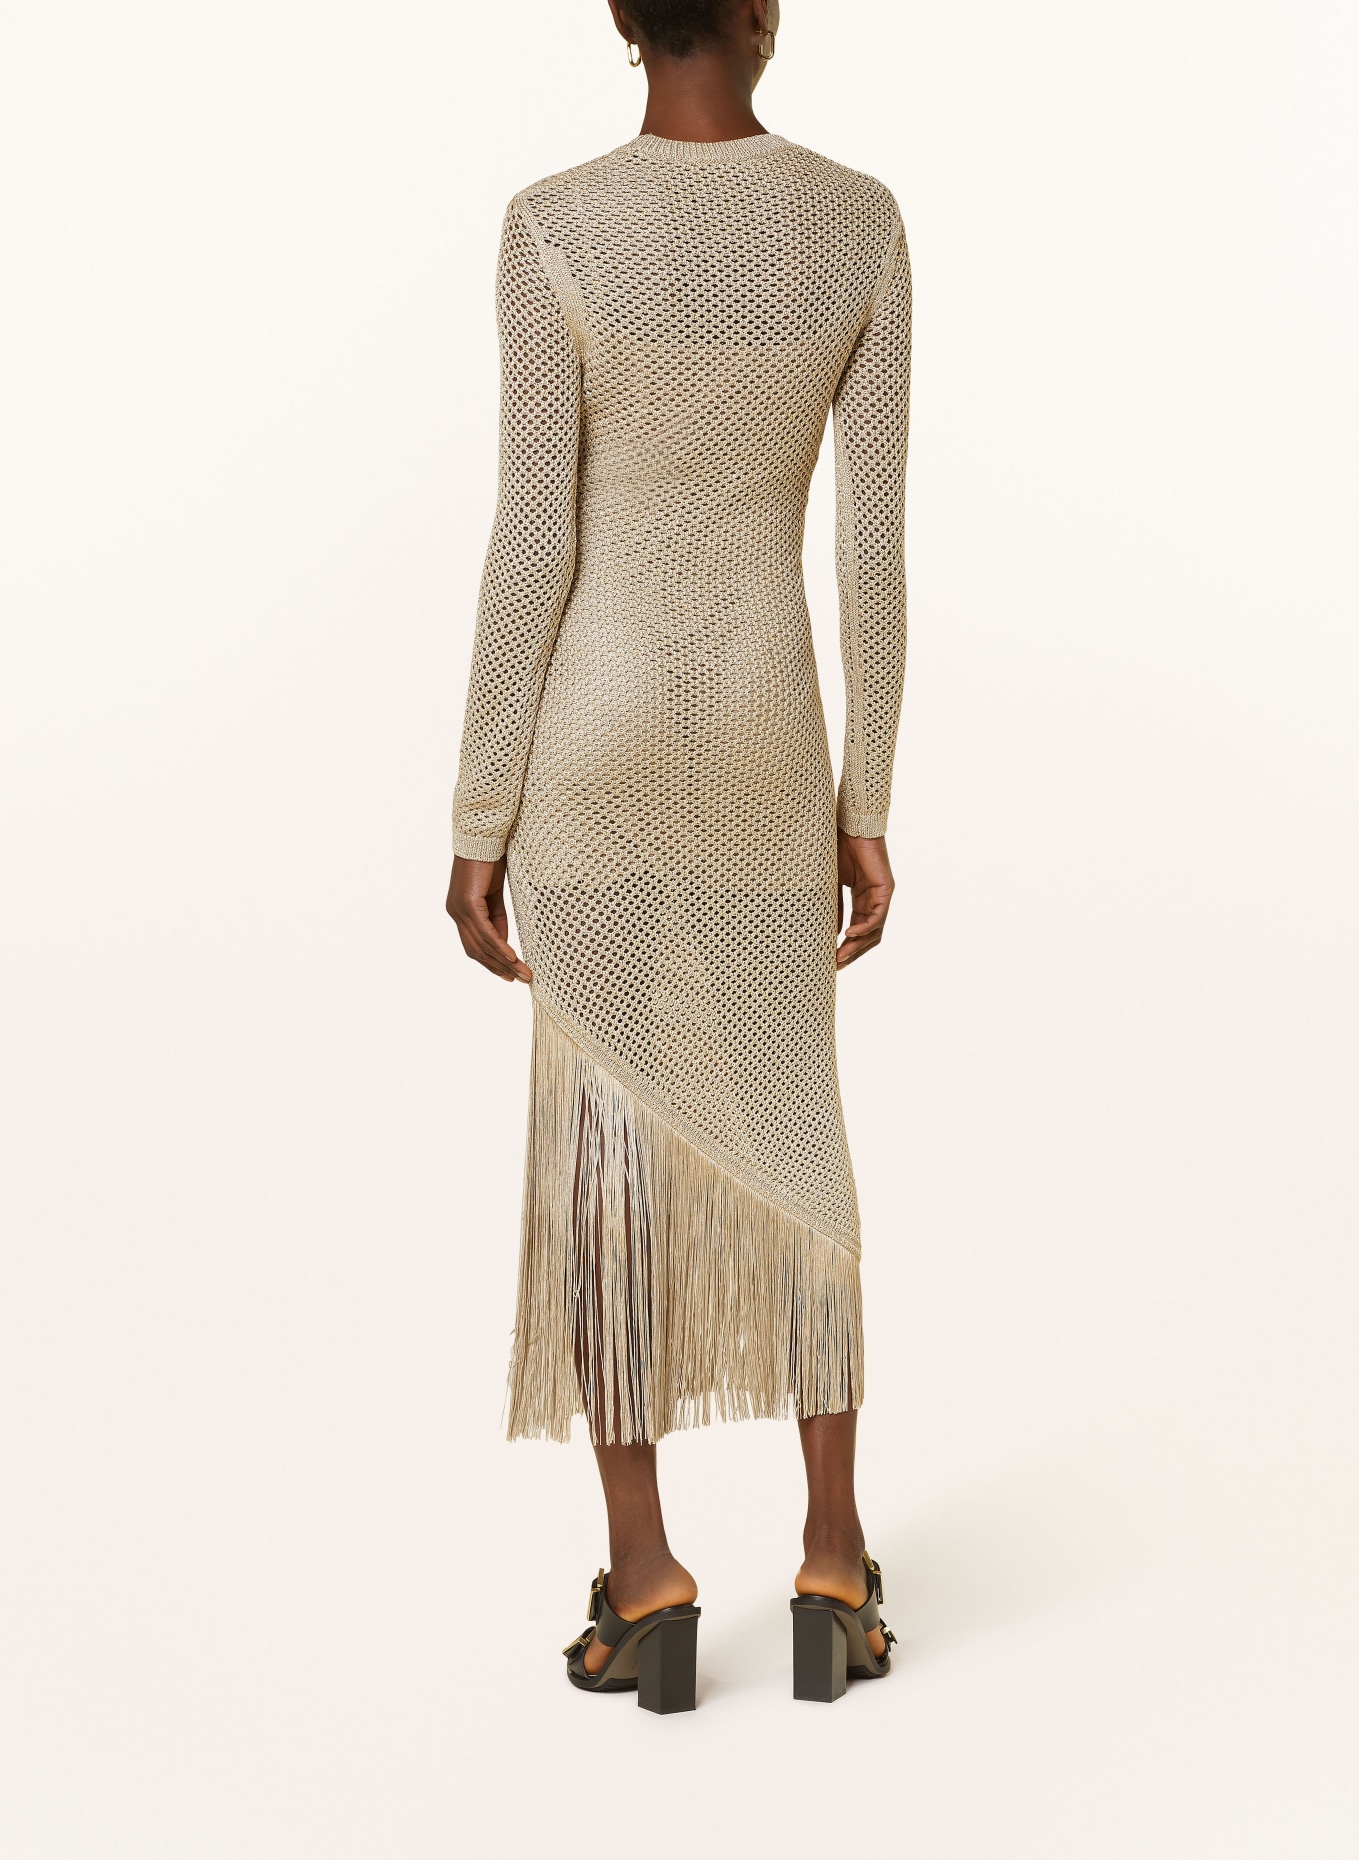 ALLSAINTS 2-in-1 dress JESSE in mixed materials, Color: BEIGE/ GOLD (Image 3)